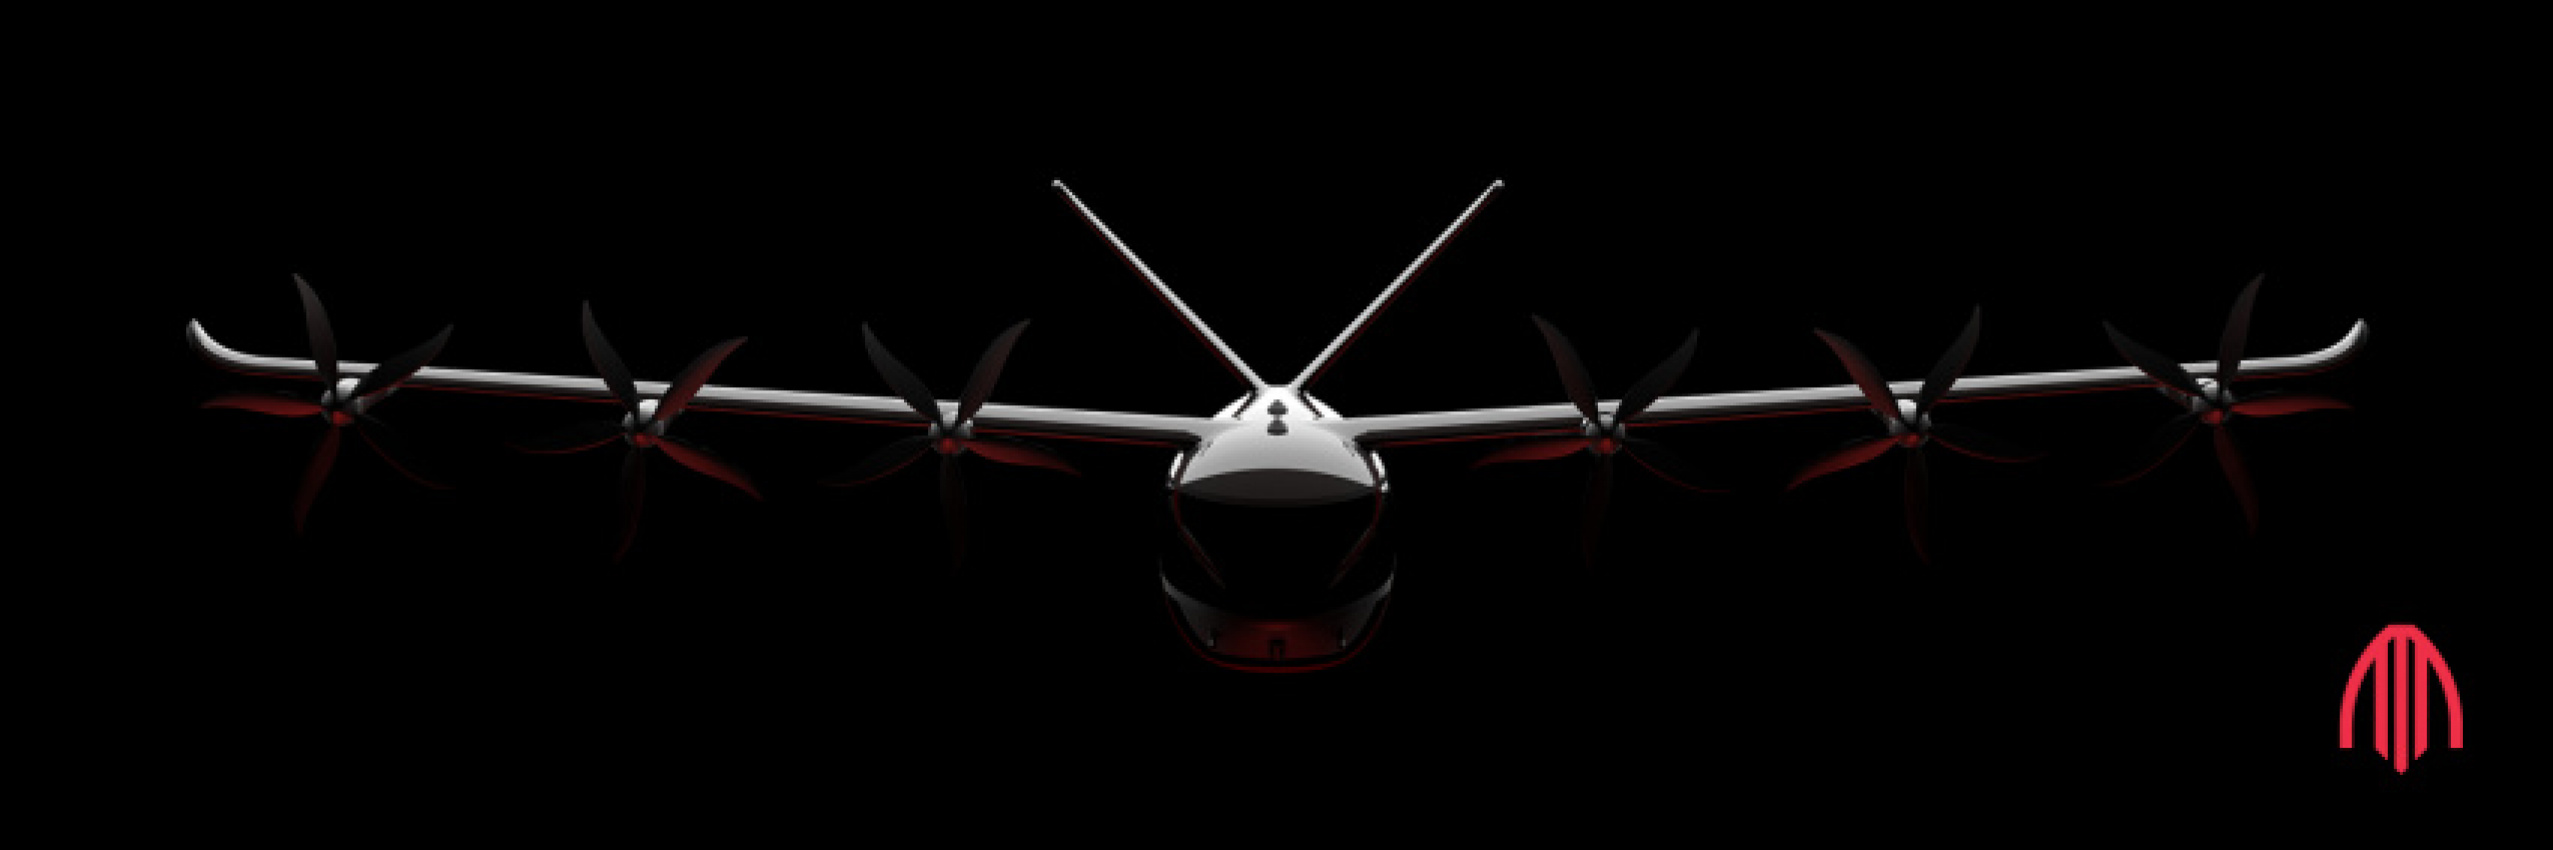 autos, cars, flying vehicles, archer, brett adcock, doug ostermann, fca fiat chrysler automobiles, fca group partners with u.s. air taxi start-up archer to accelerate evtol production